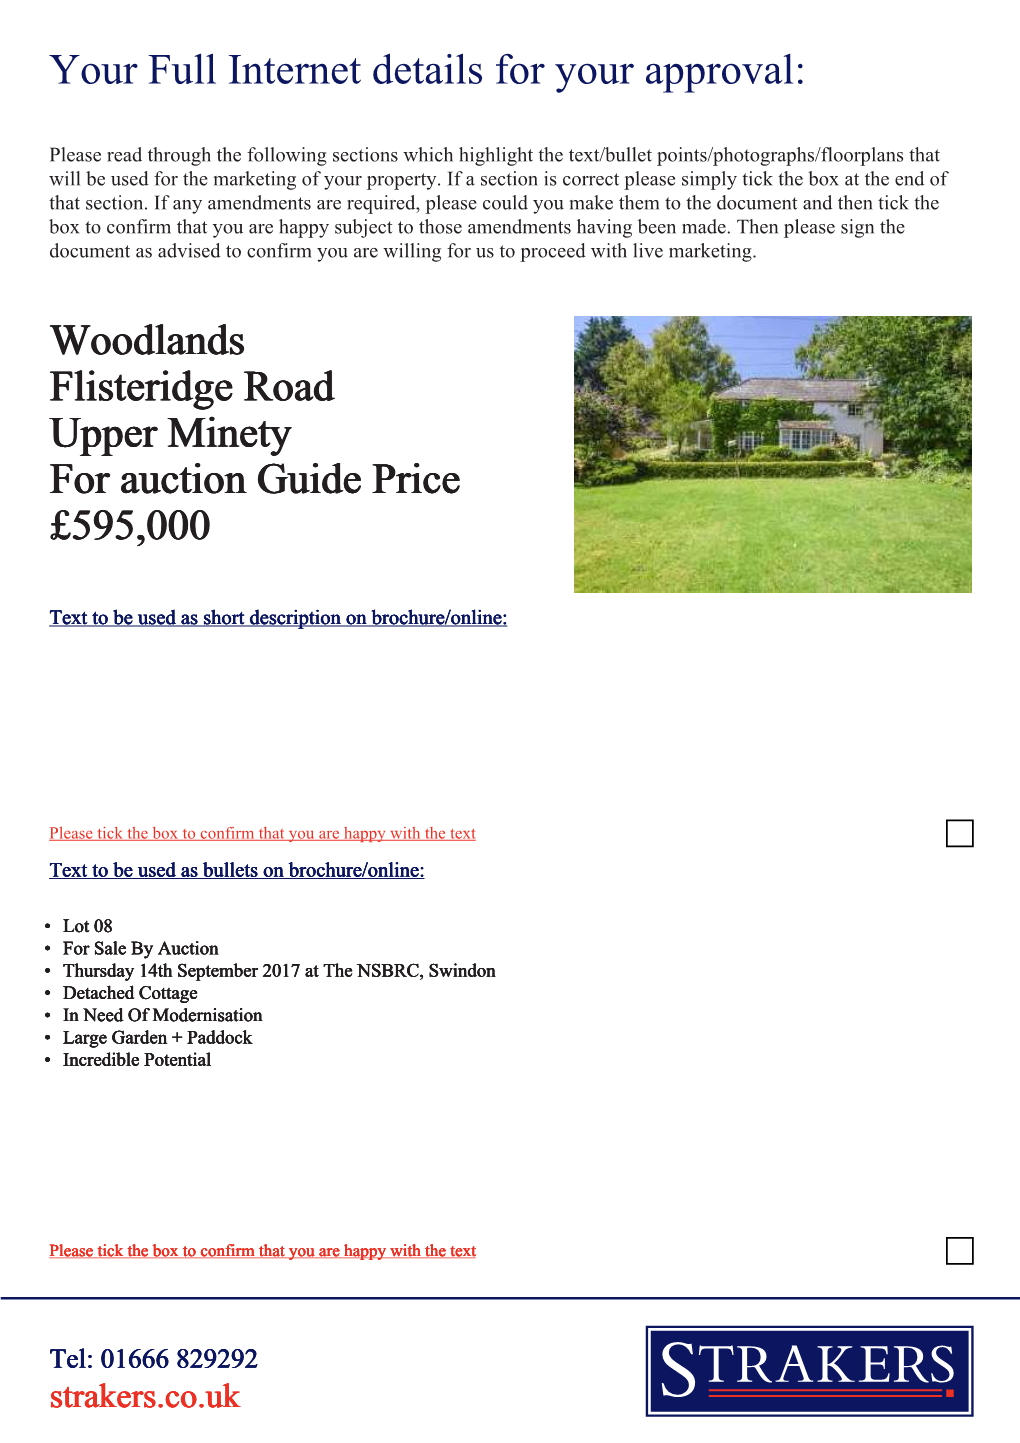 Woodlands Flisteridge Road Upper Minety for Auction Guide Price £595,000